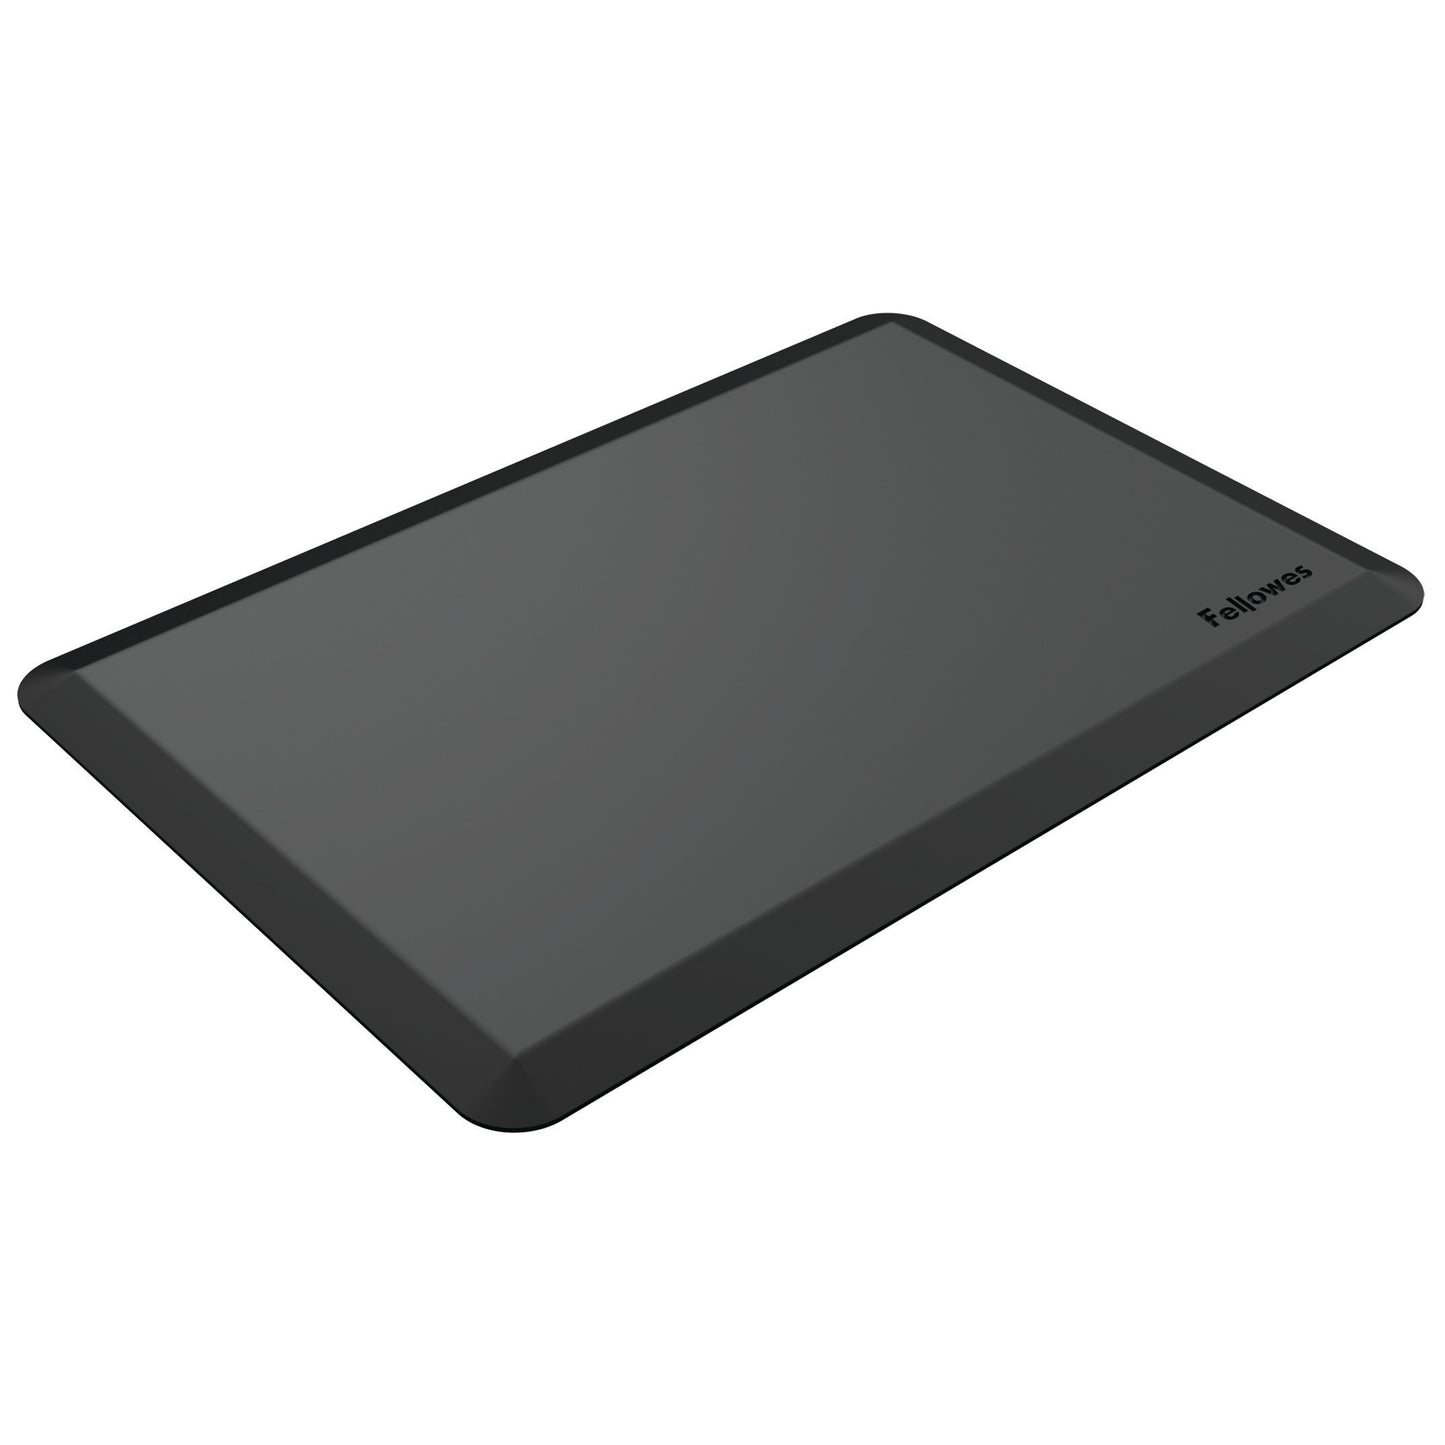 BUY FELLOWES® SIT STAND MAT - EVERYDAY 8707002 with FREE SHIPPING right view Affordable and Quality